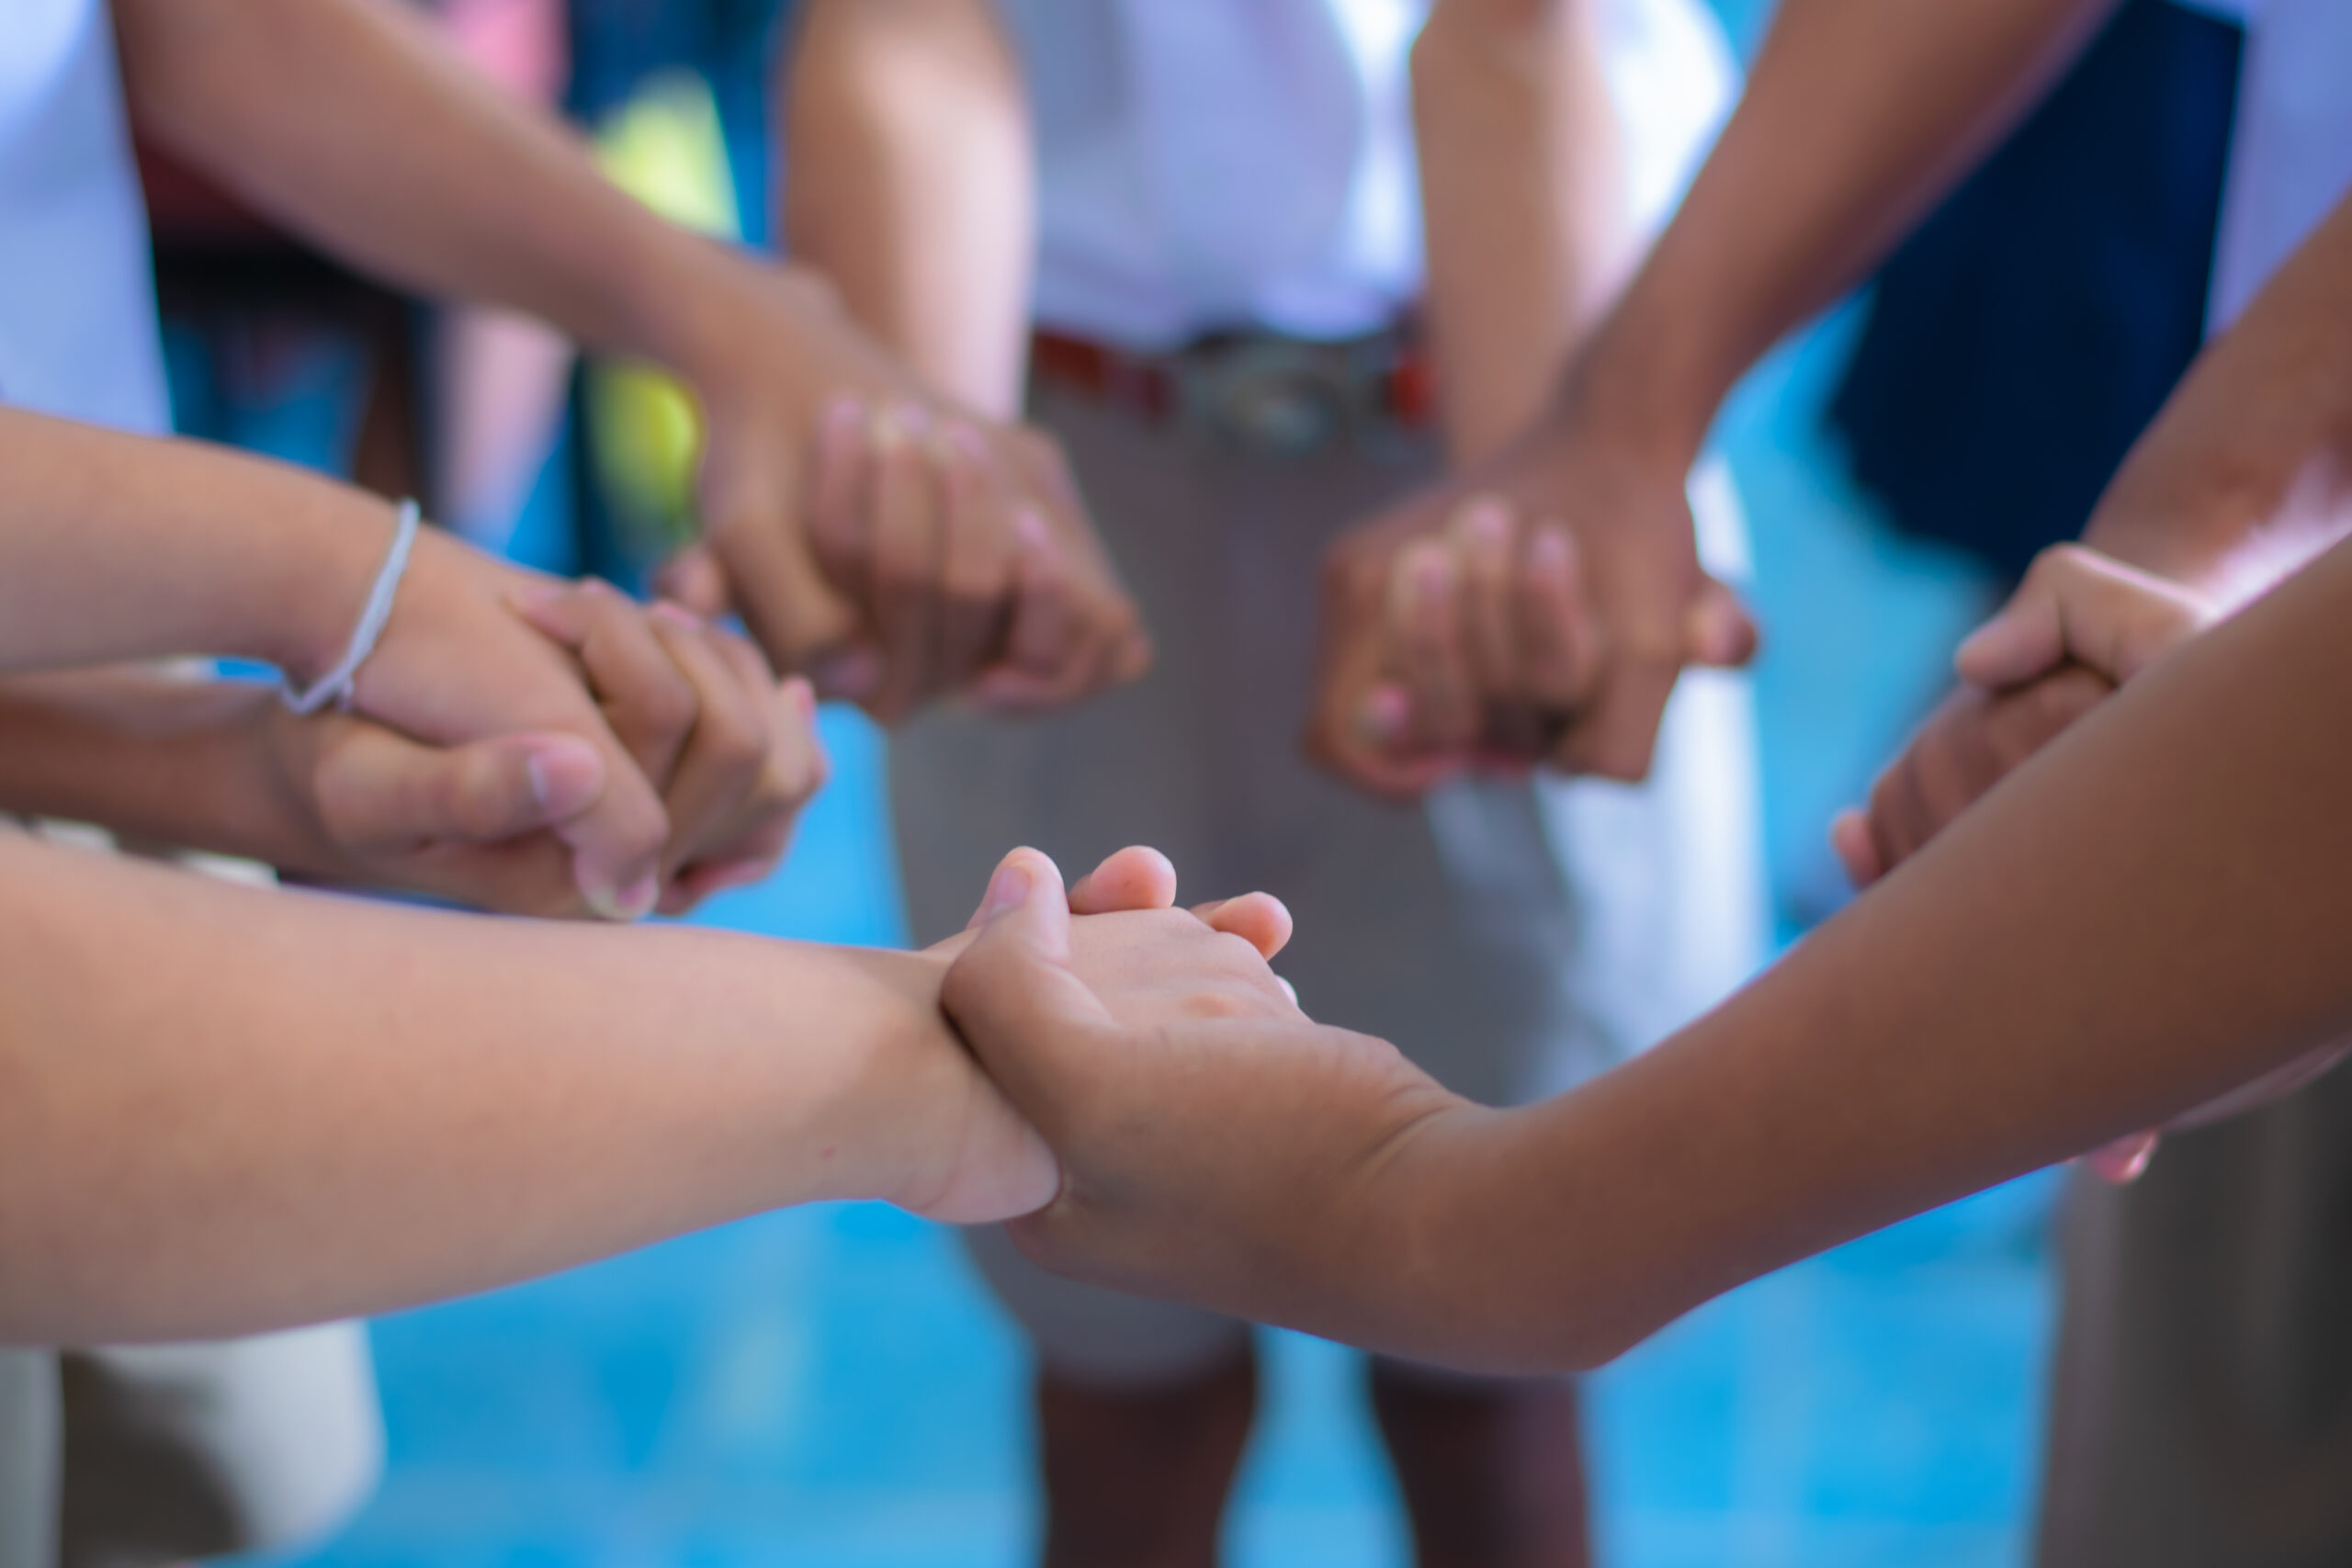 Children are standing, holding hands in a circle to play school